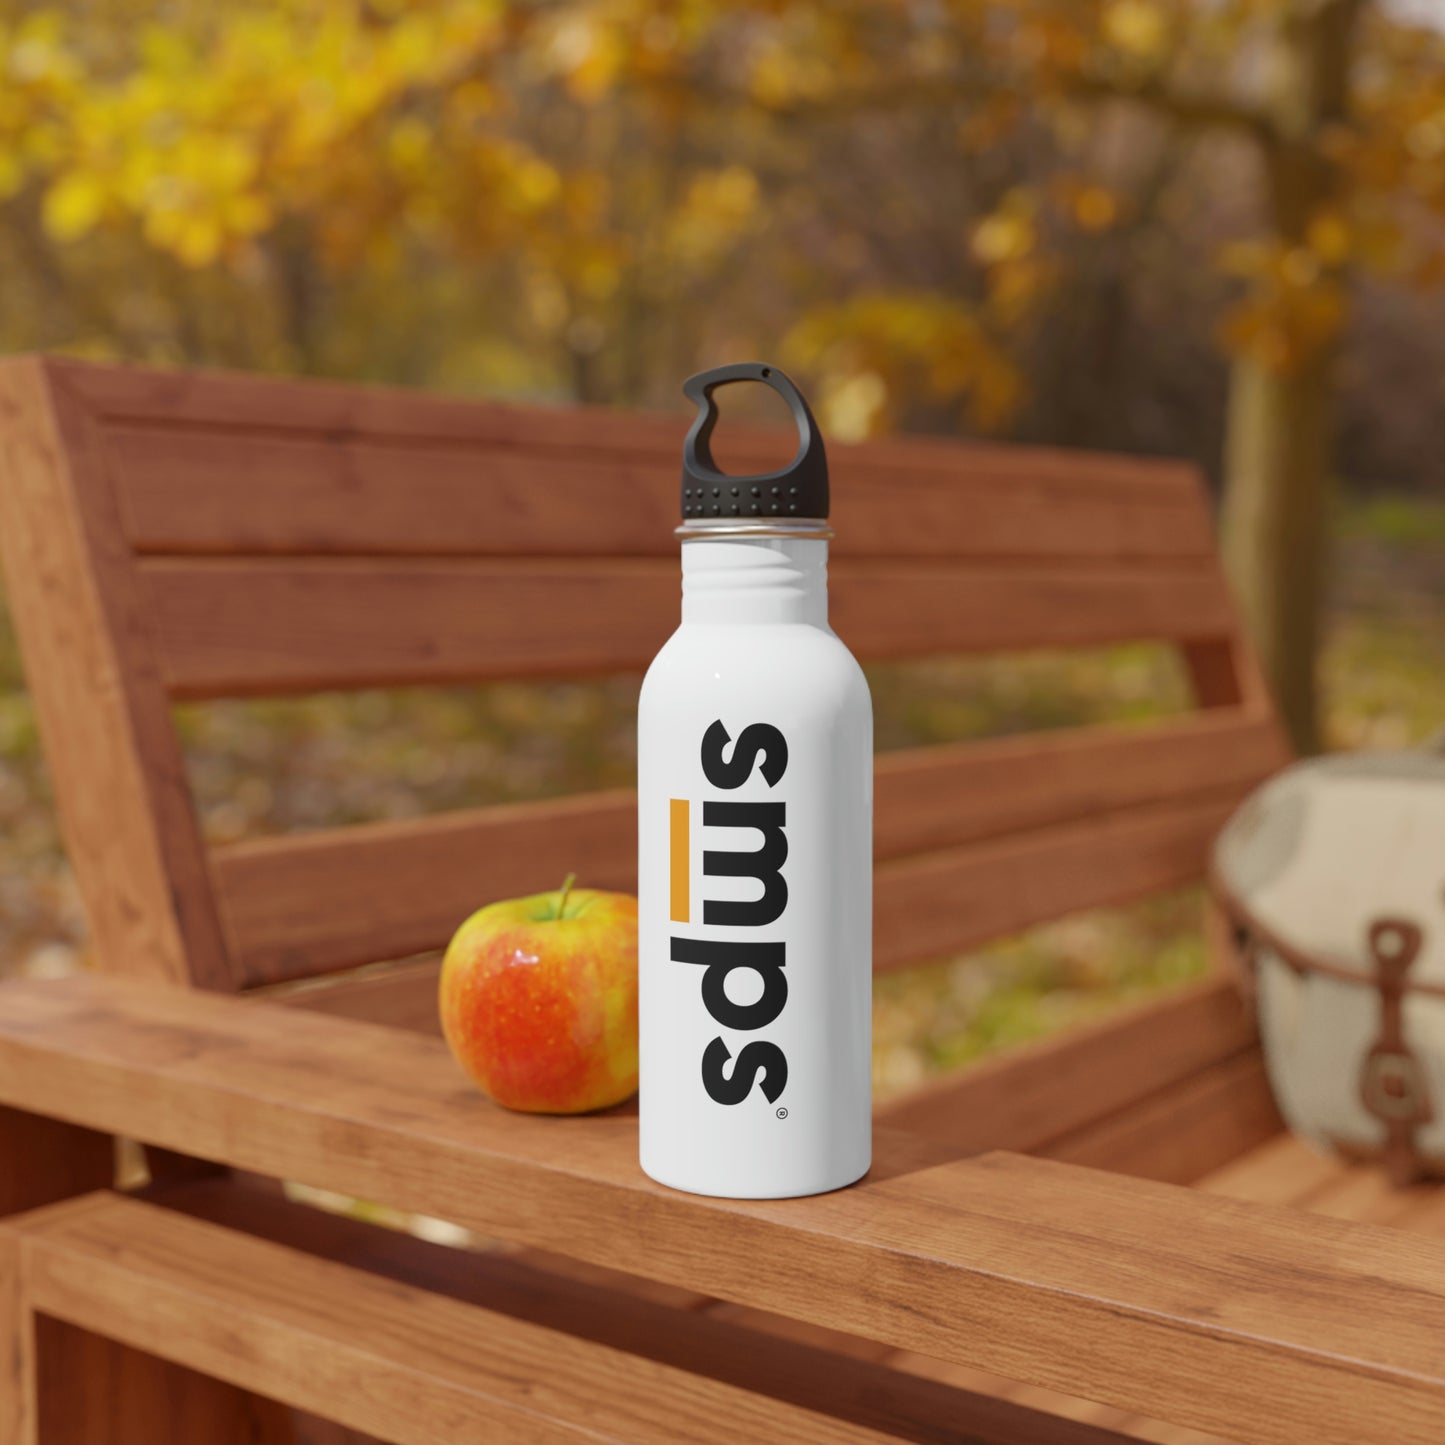 SMPS Stainless Steel Water Bottle